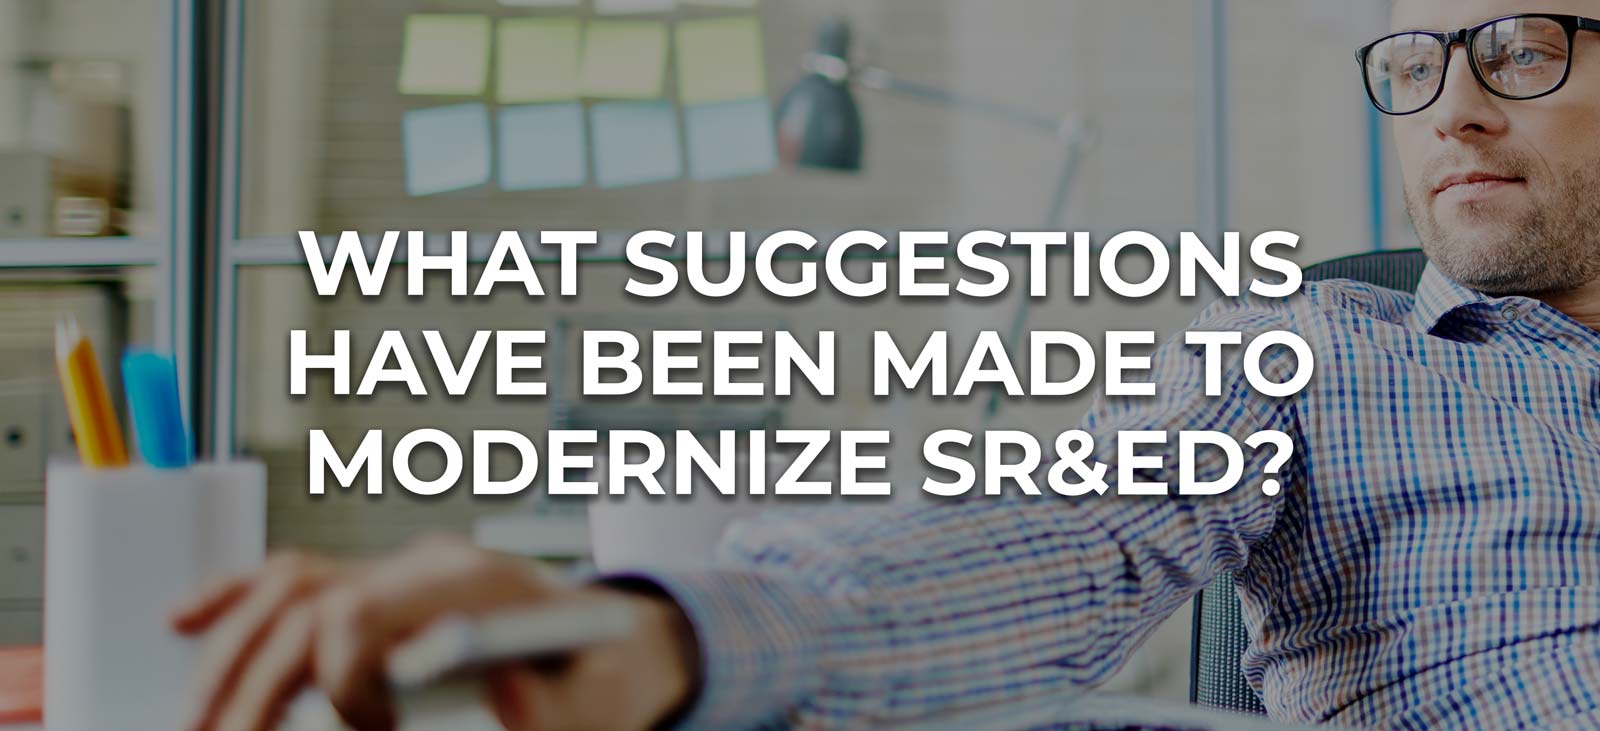 What Suggestions Have Been Made To Modernize SR&ED?